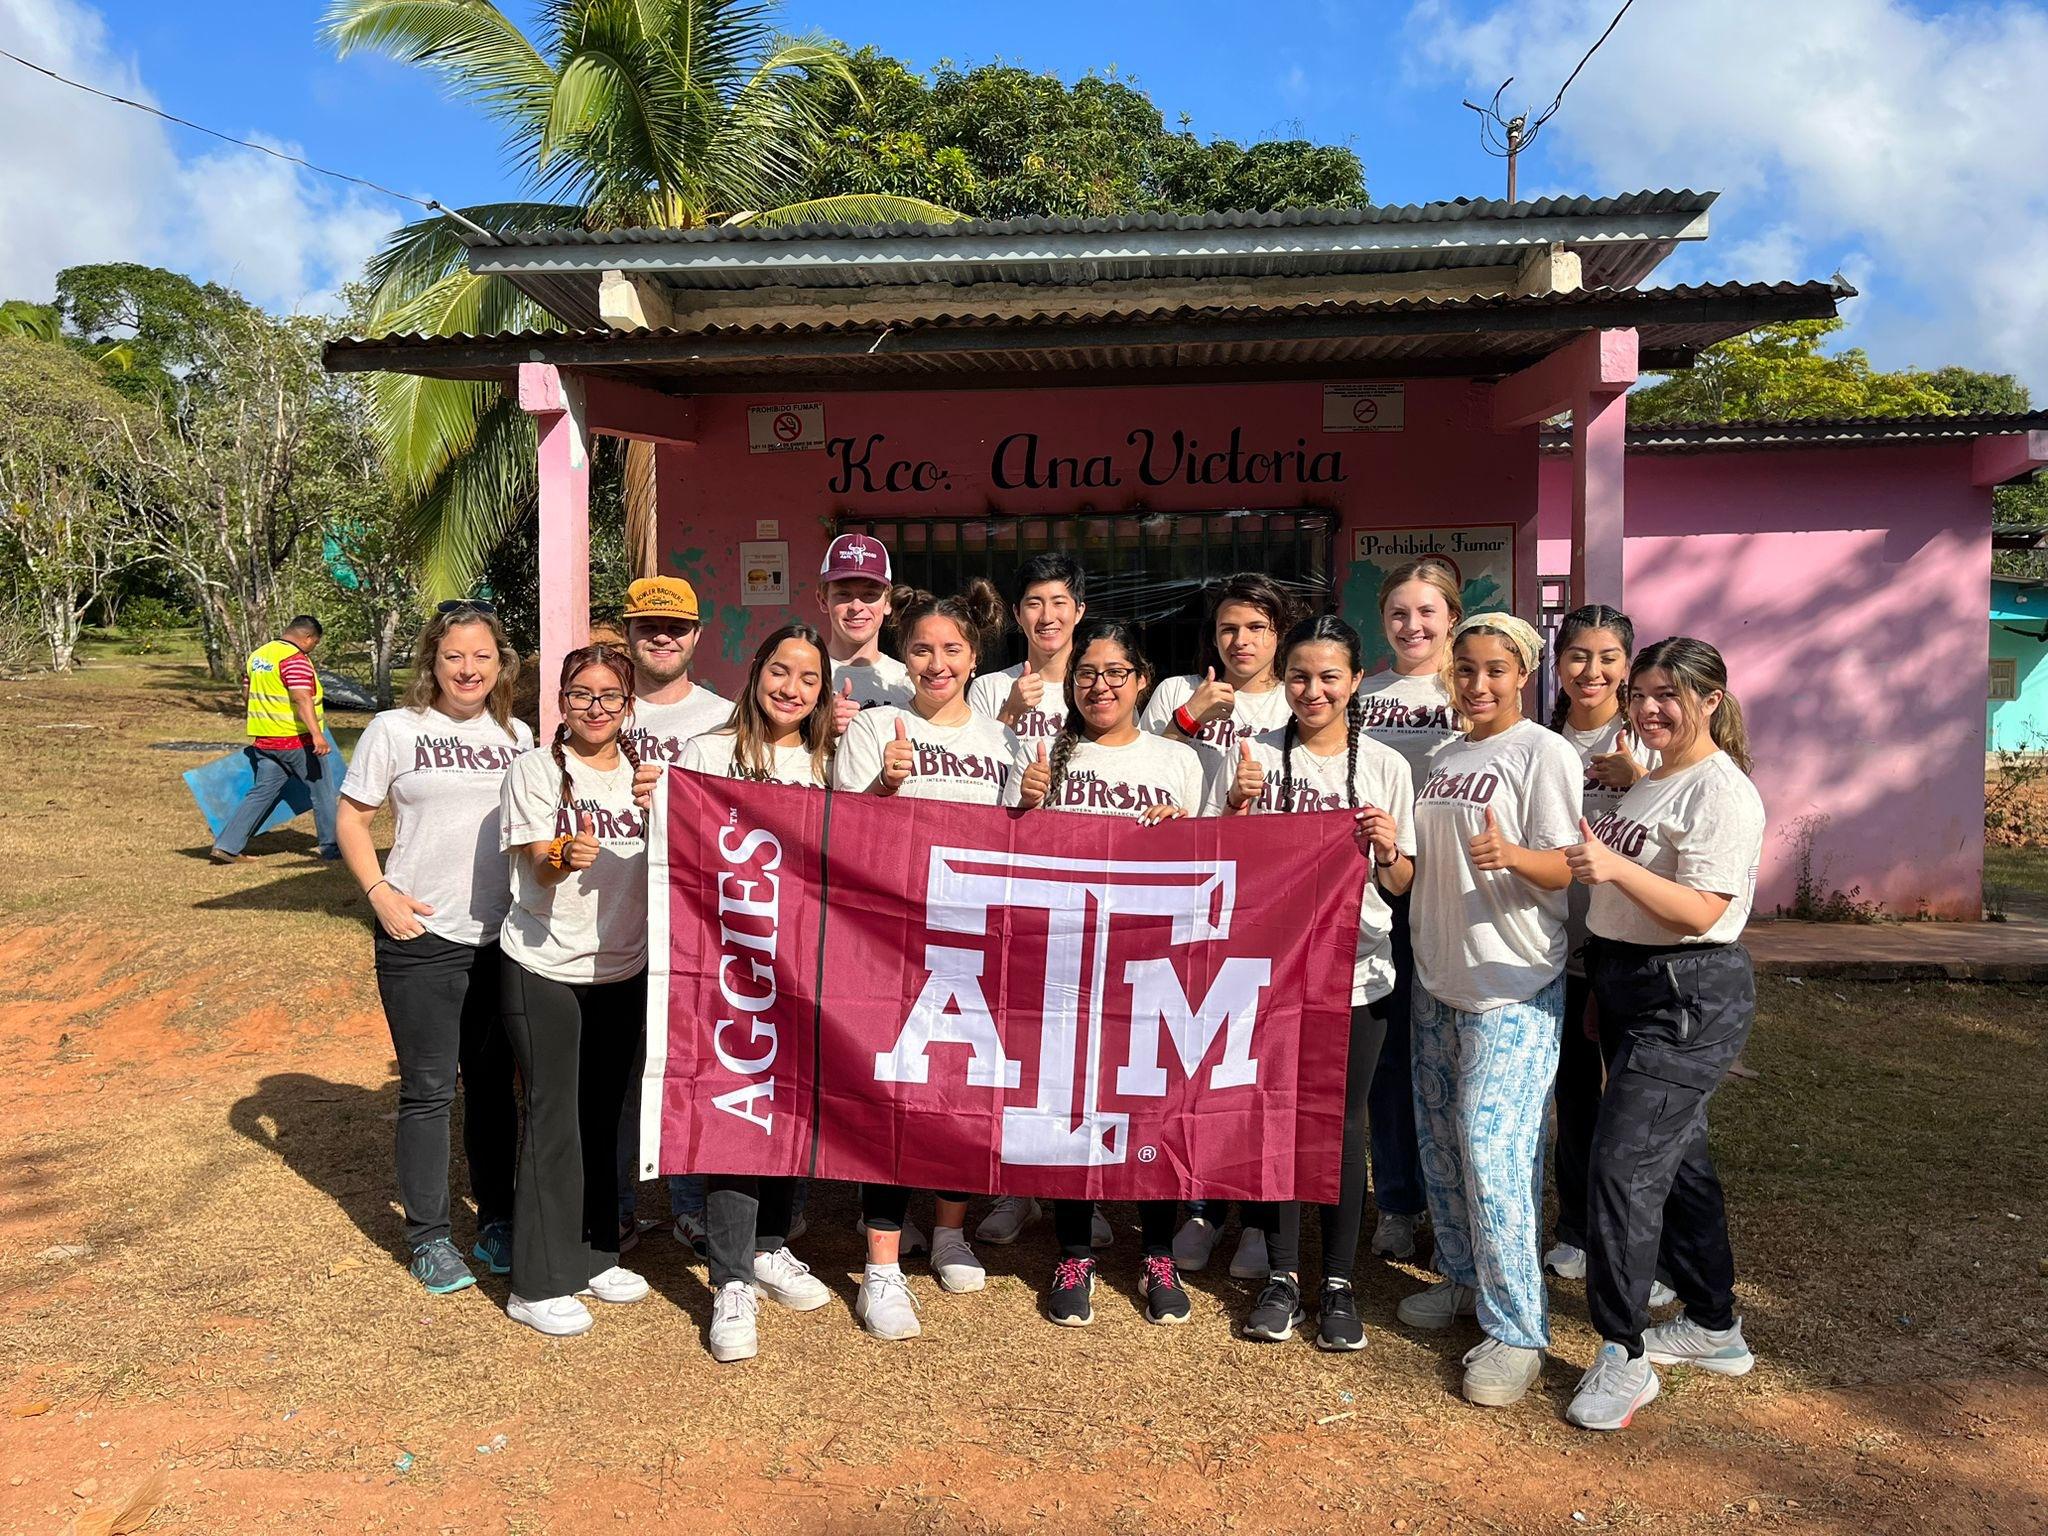 Study abroad students pose with Texas A&M banner.